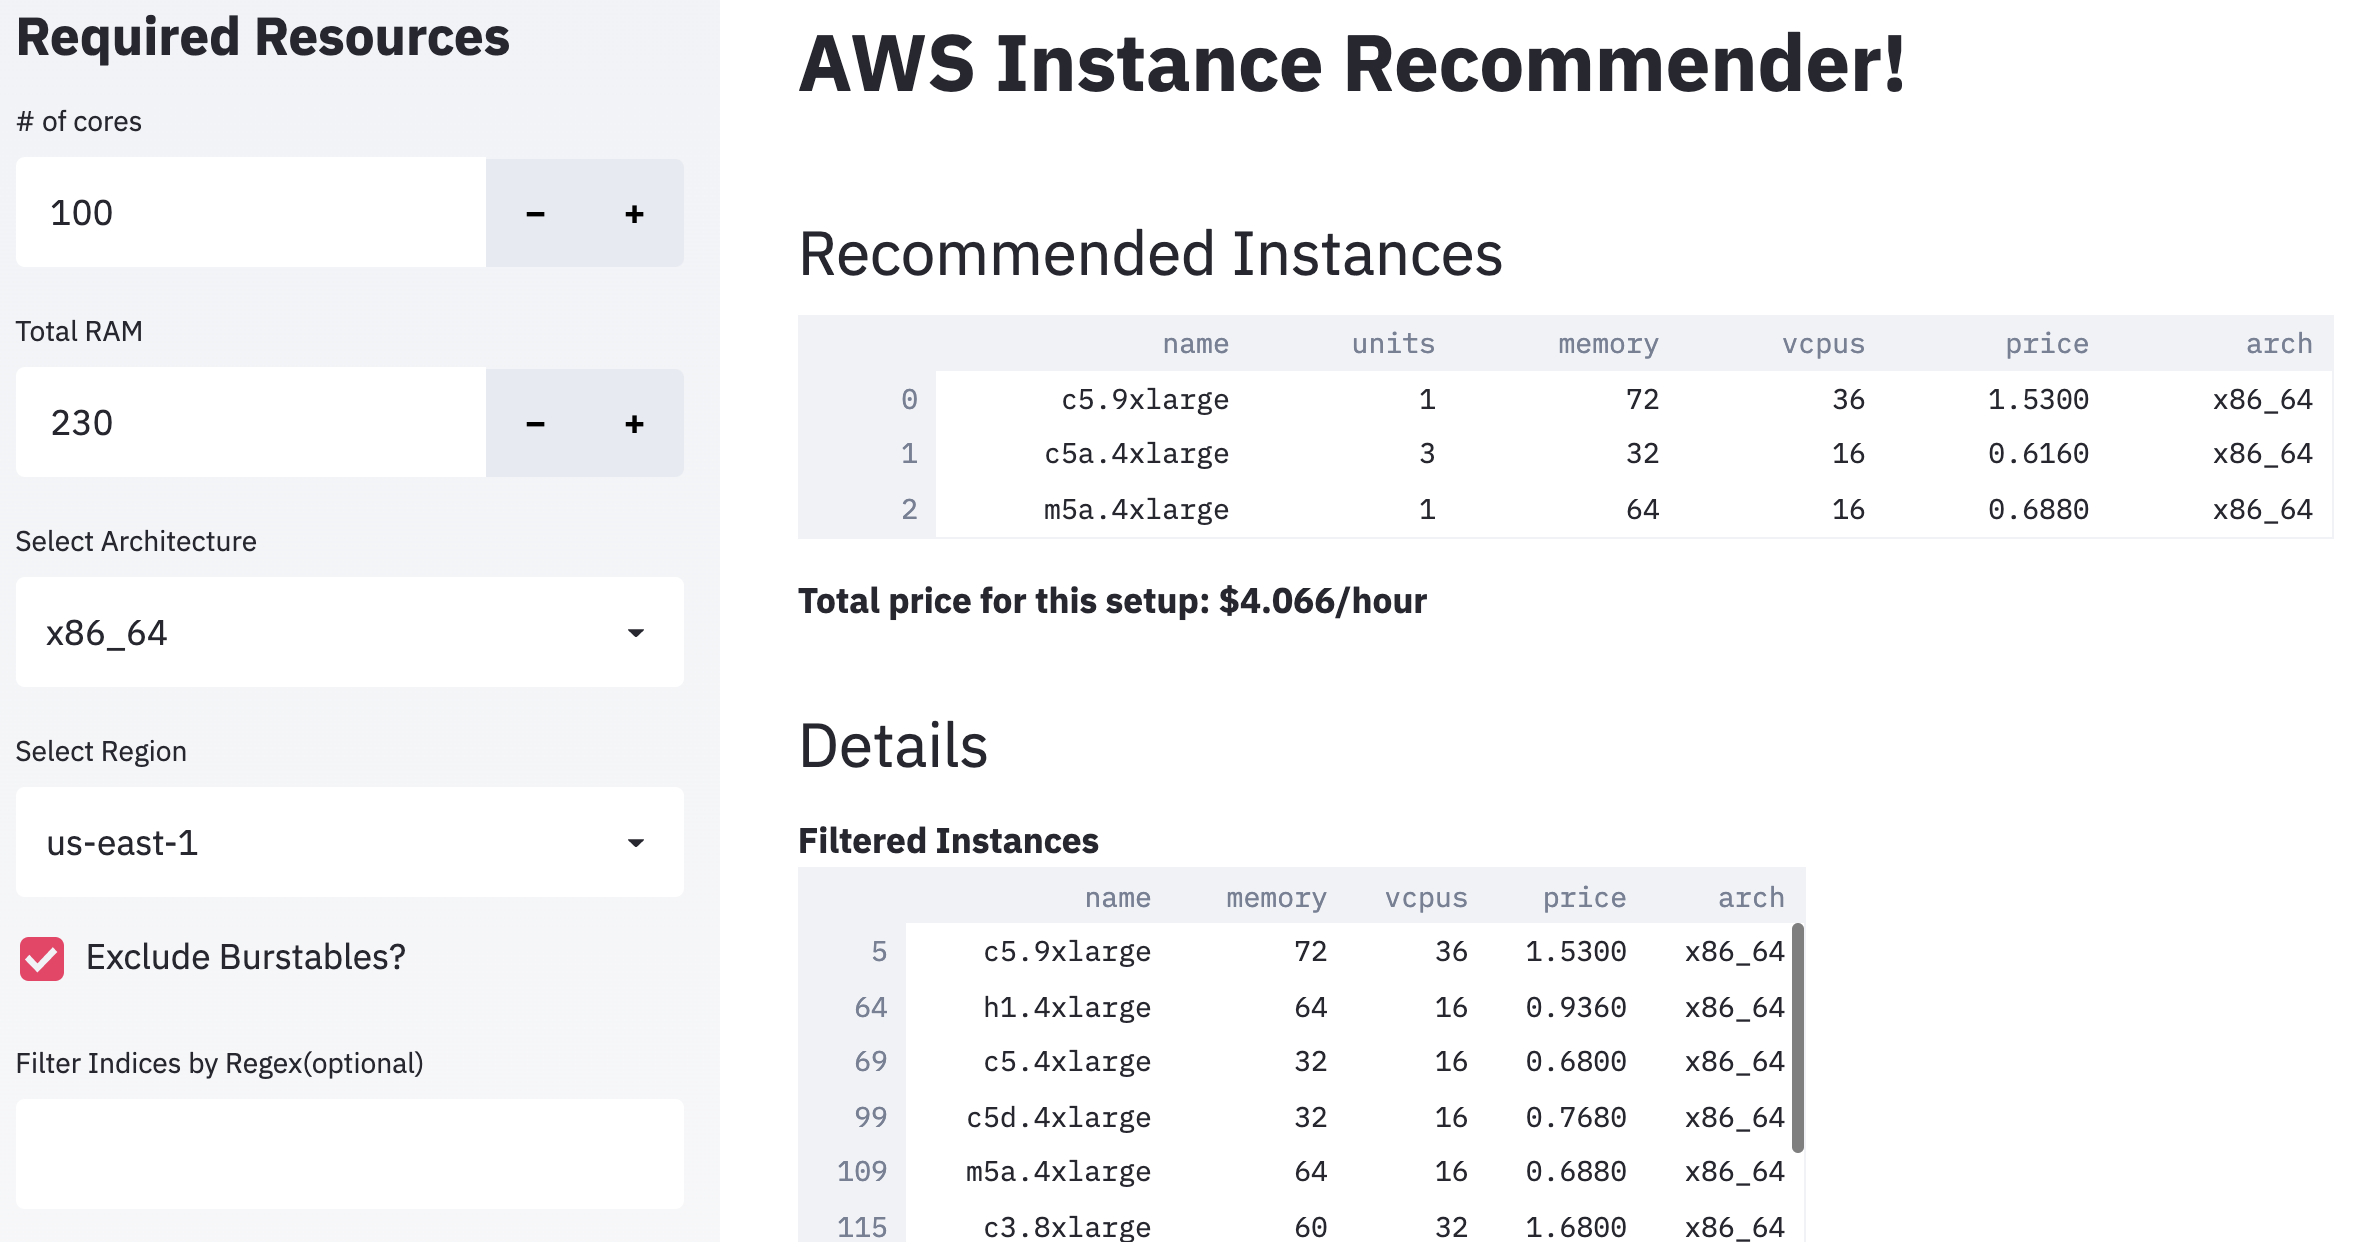 AWS Instance Recommender